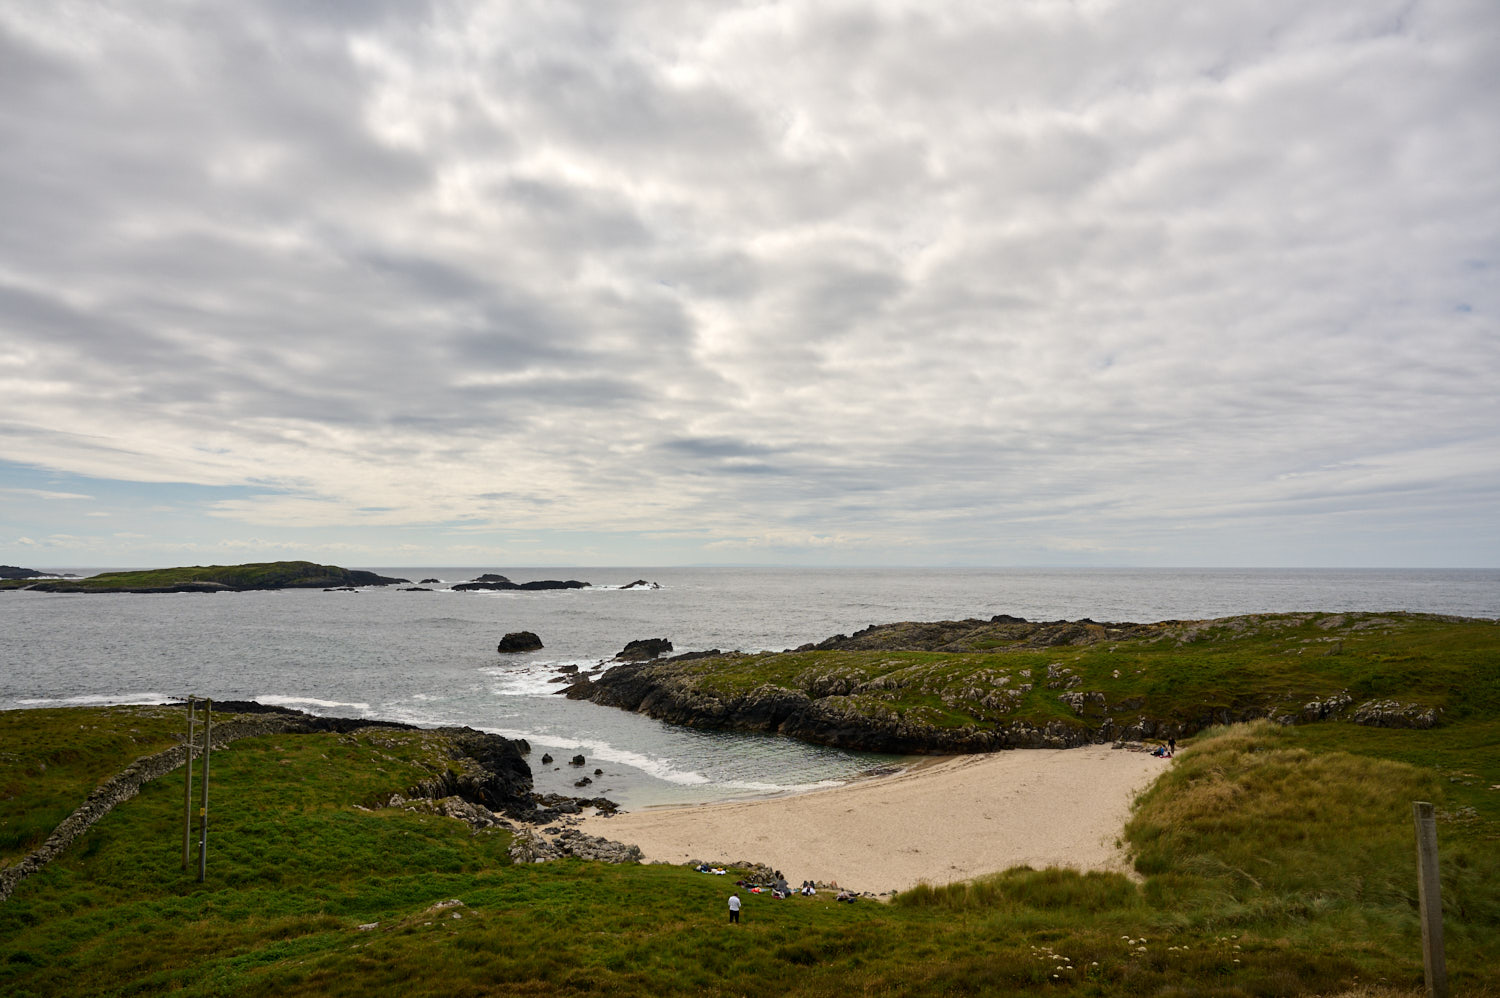 Walking through Currie Sands in the Isle of Islay